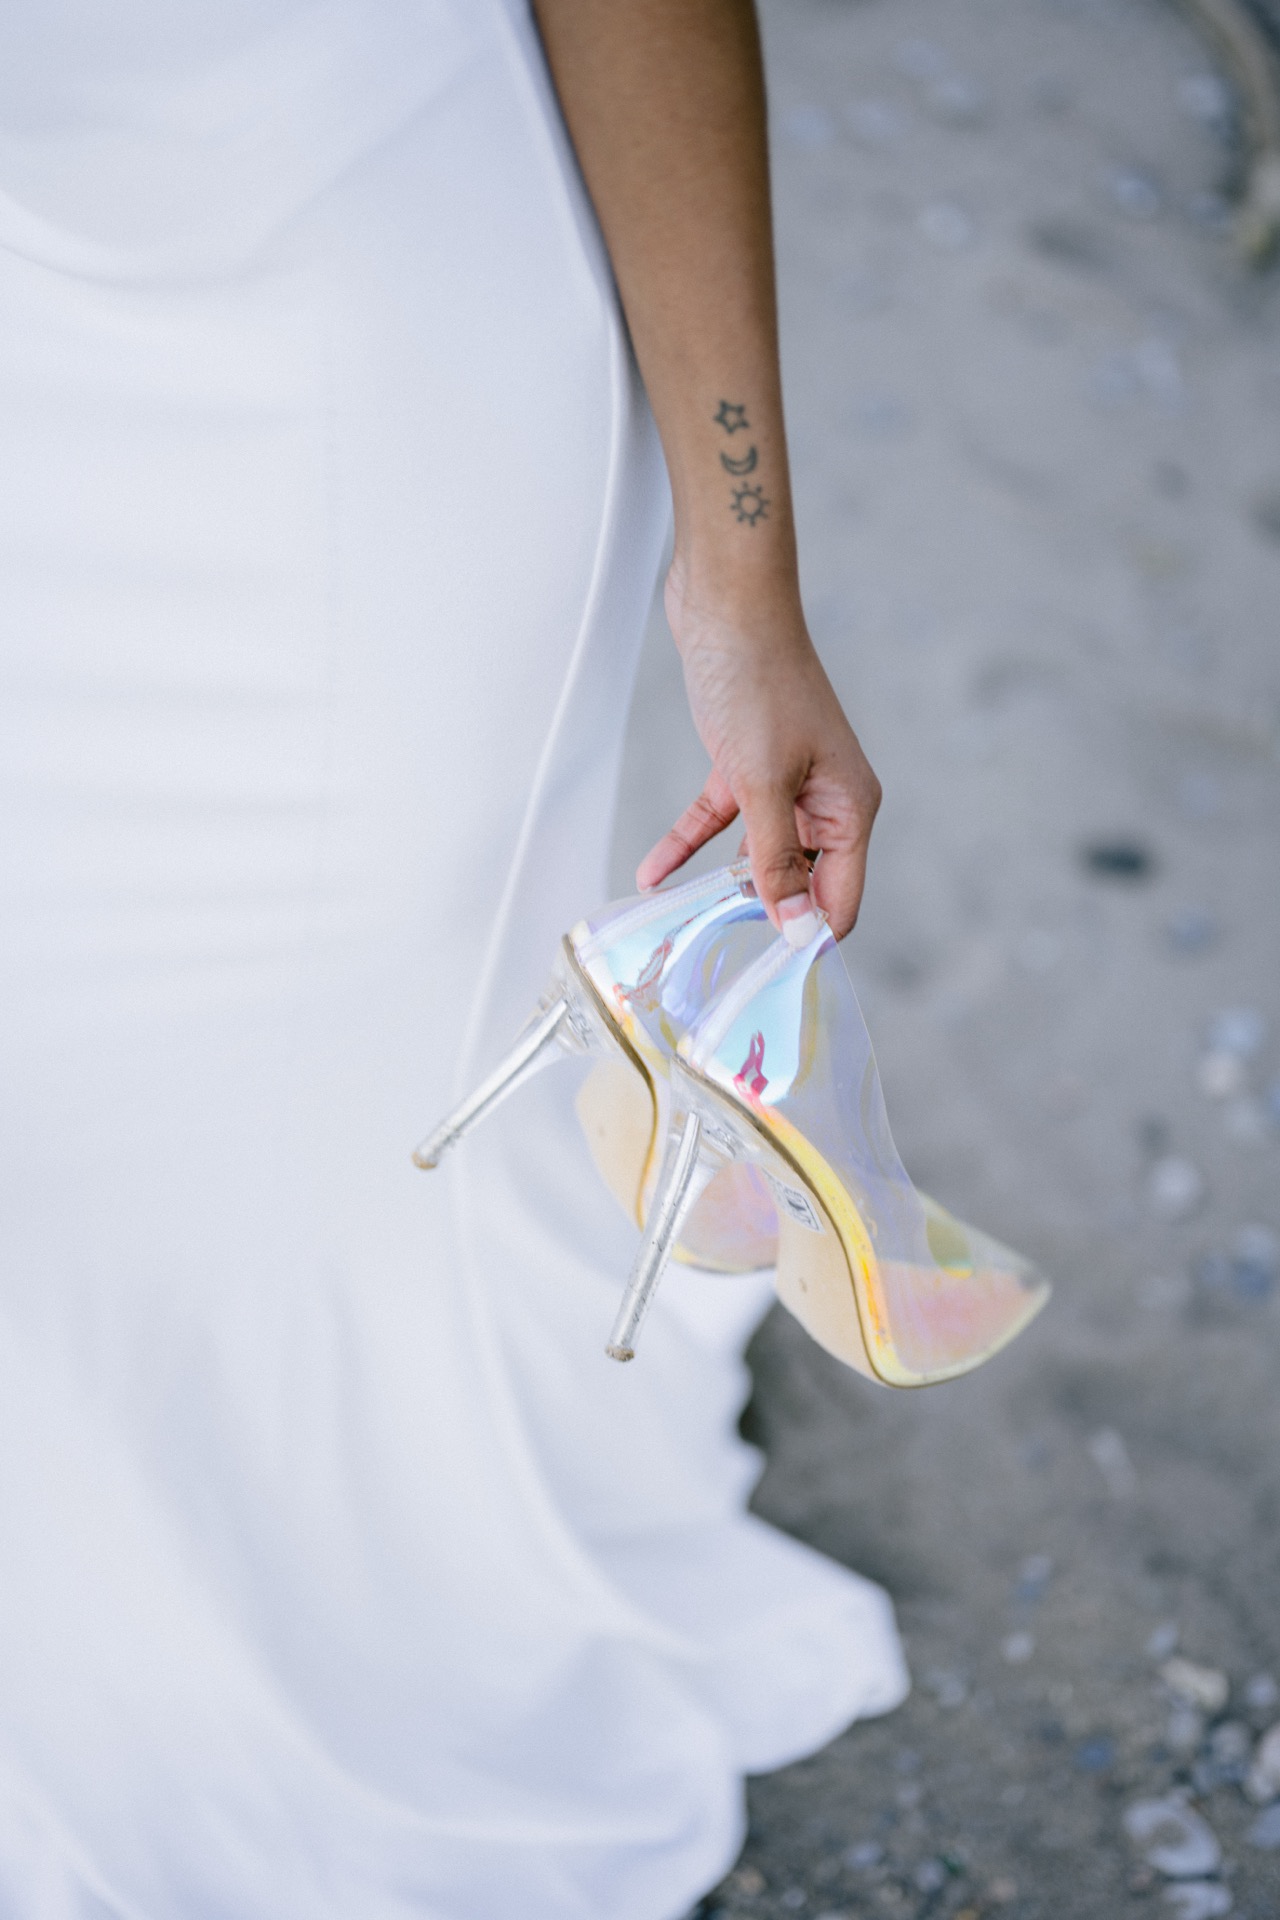 Bride with a tattoo on her hand and carry her high heels while walking on sand.